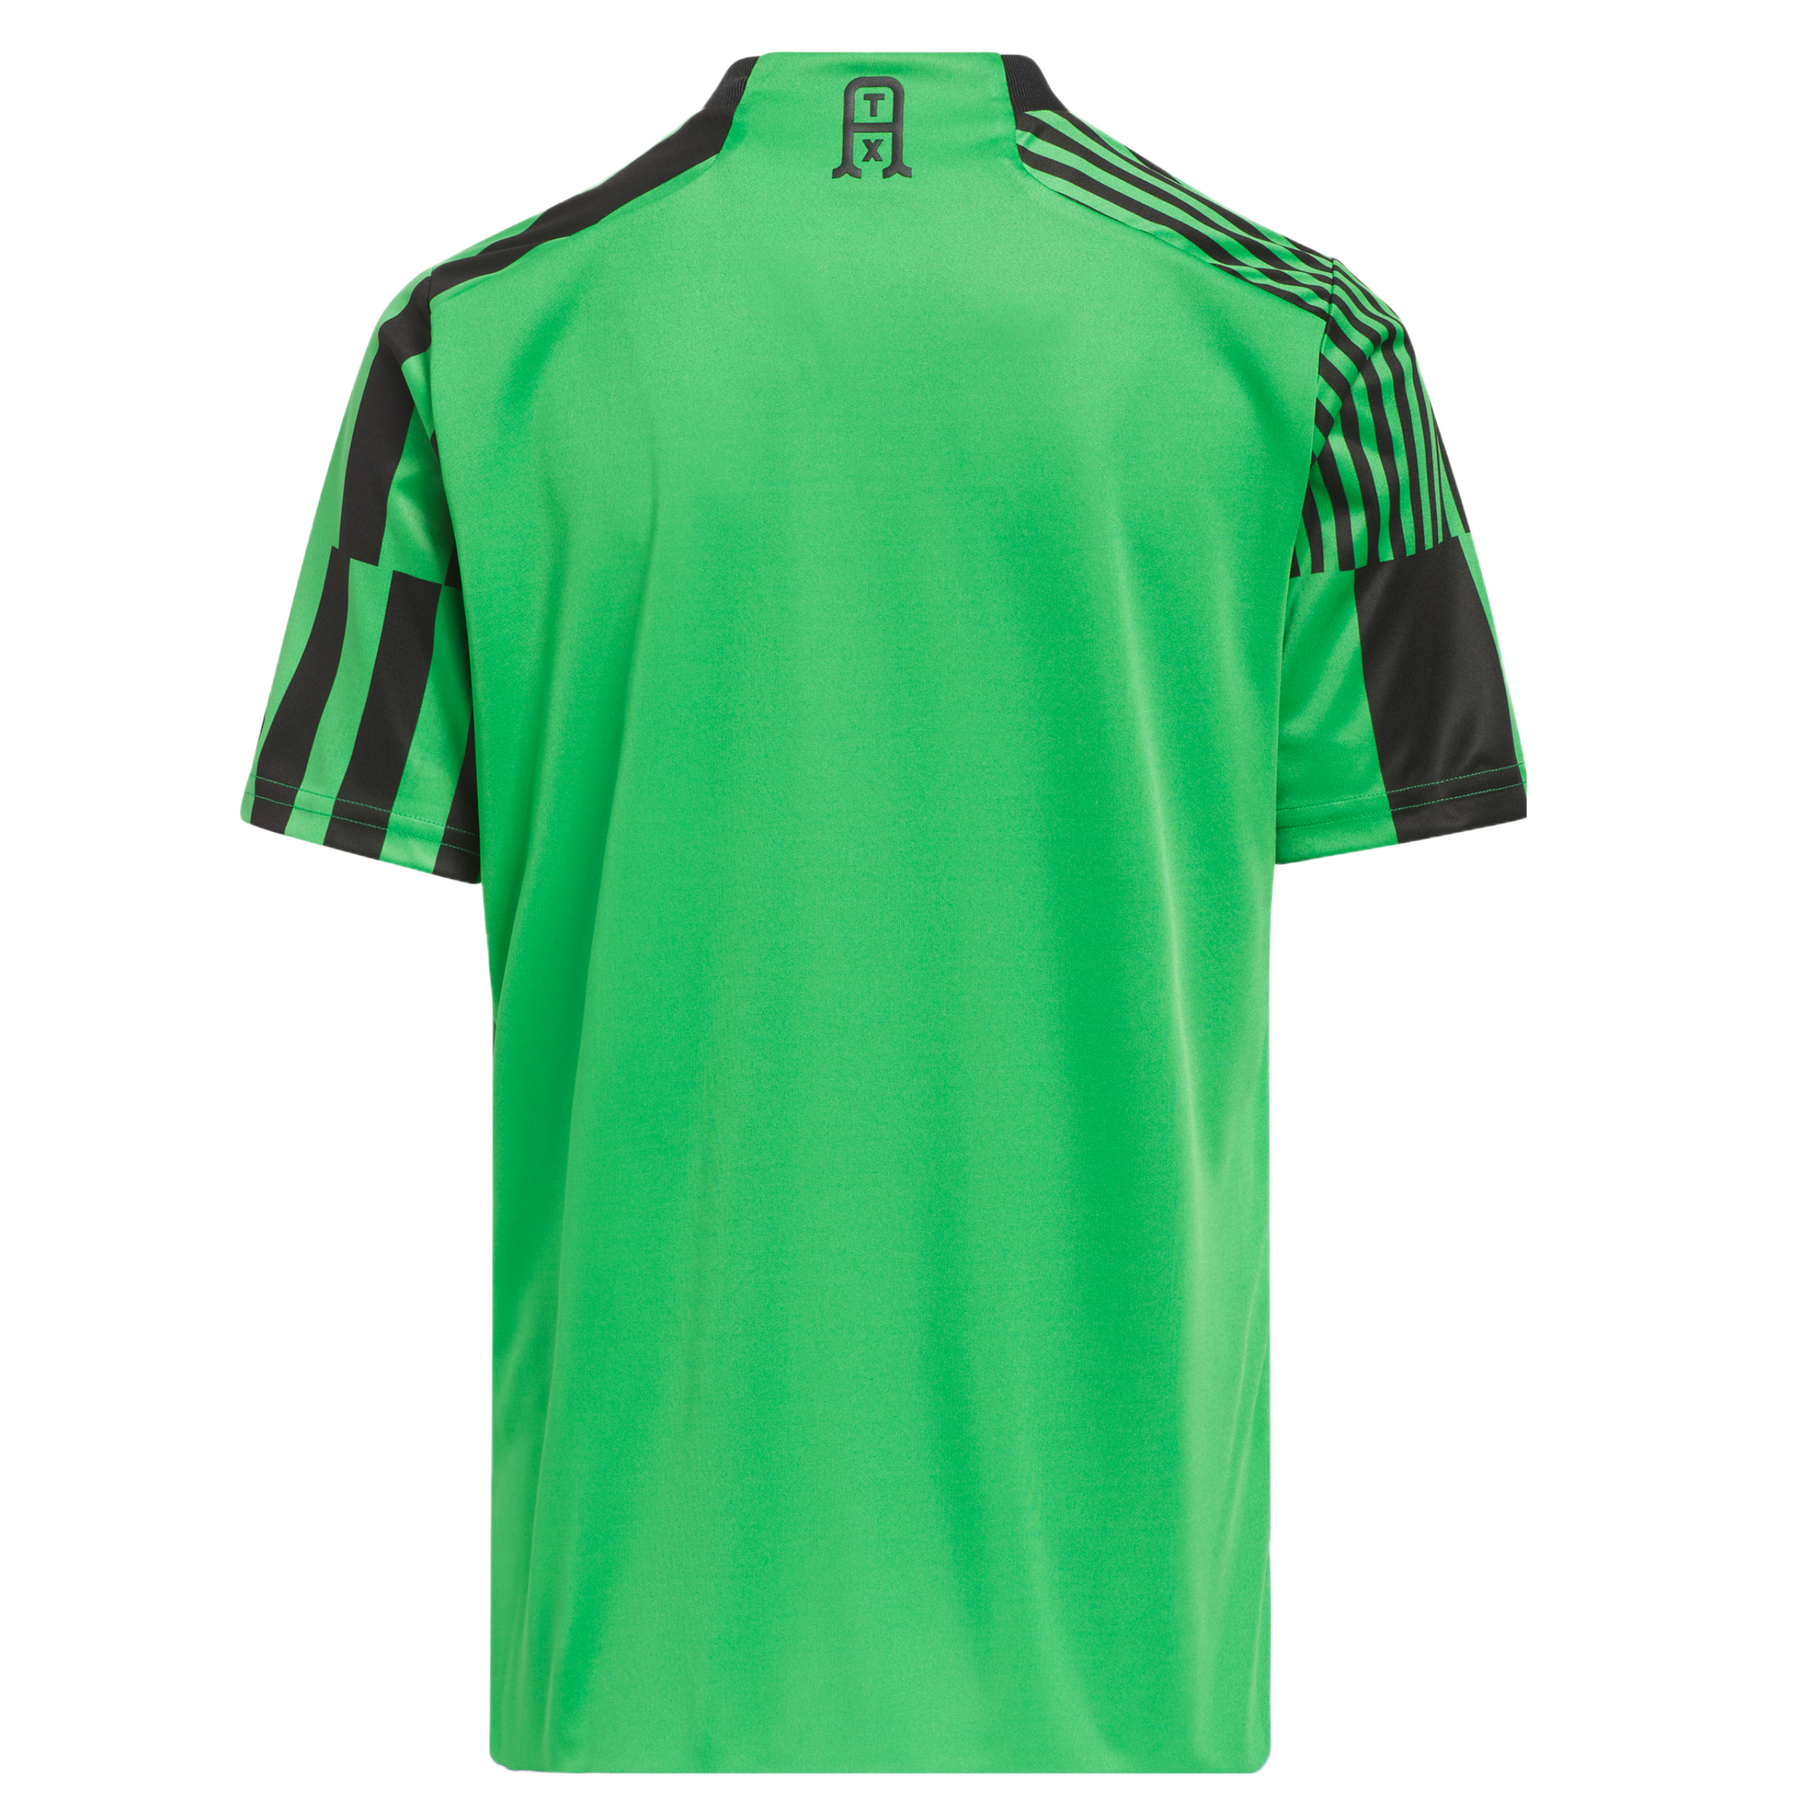 Austin FC Release The Sentimiento Kit as the Club's Secondary